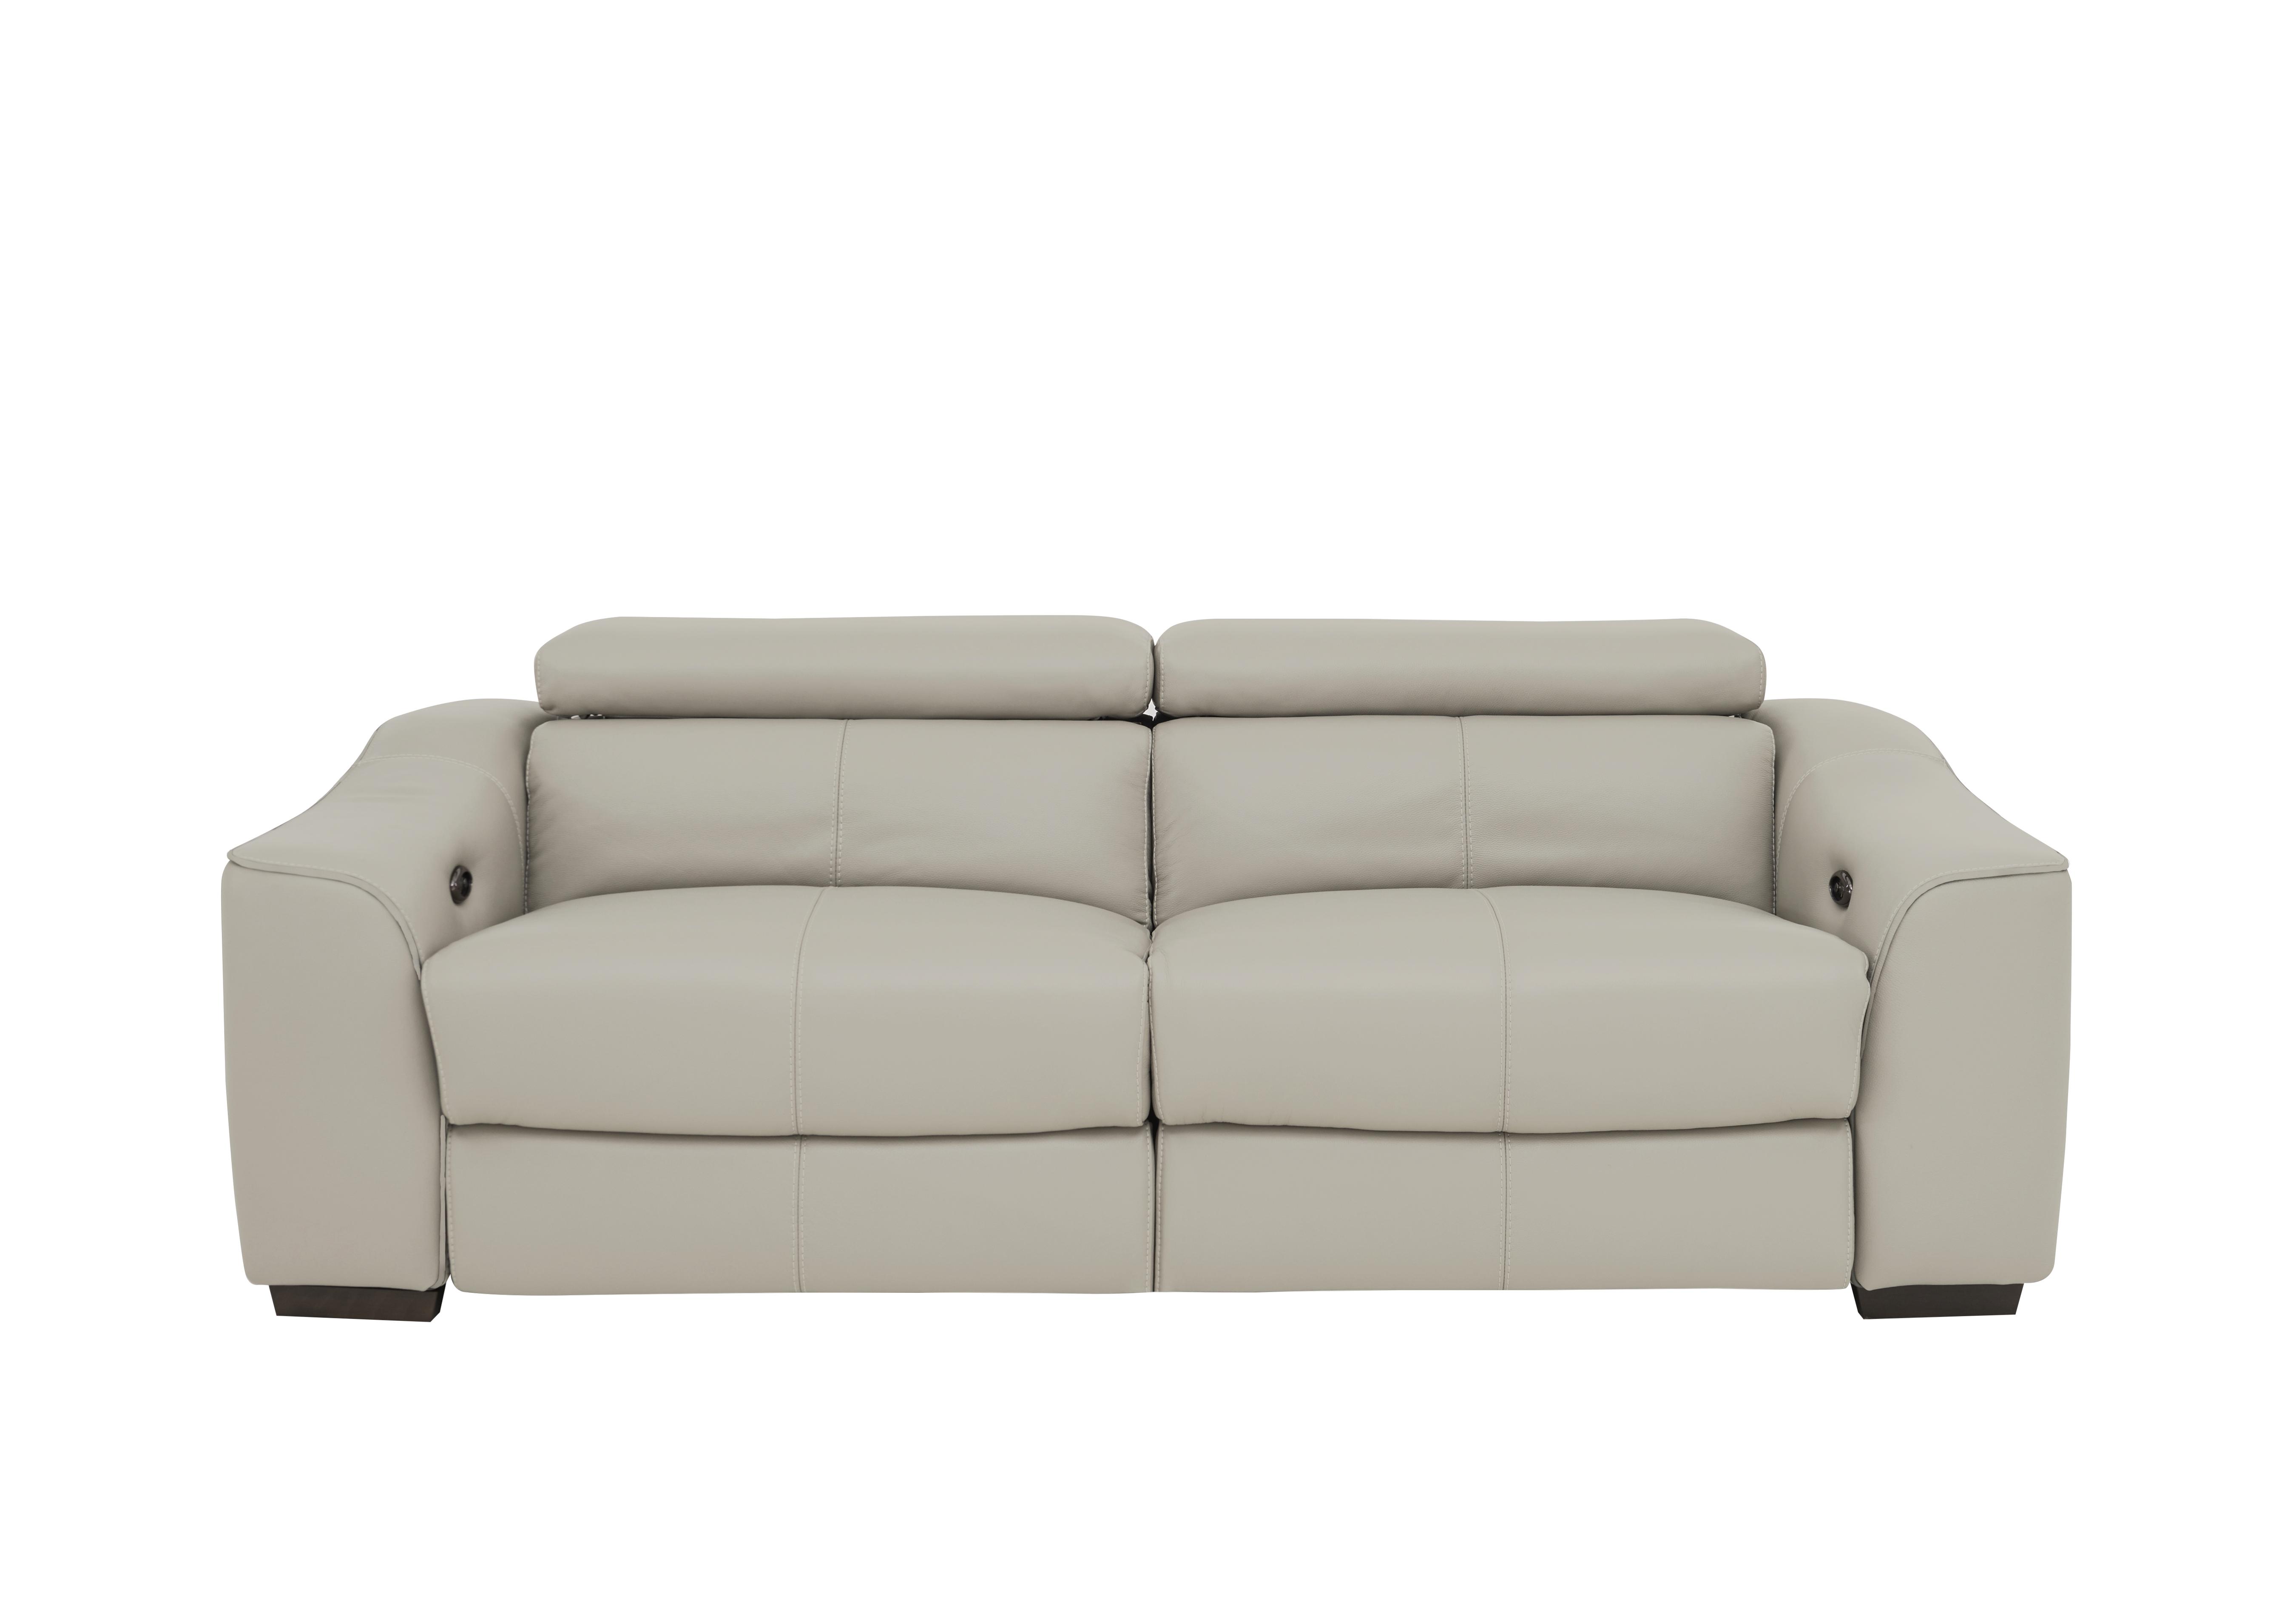 Elixir 3 Seater Leather Sofa in Bv-946b Silver Grey on Furniture Village